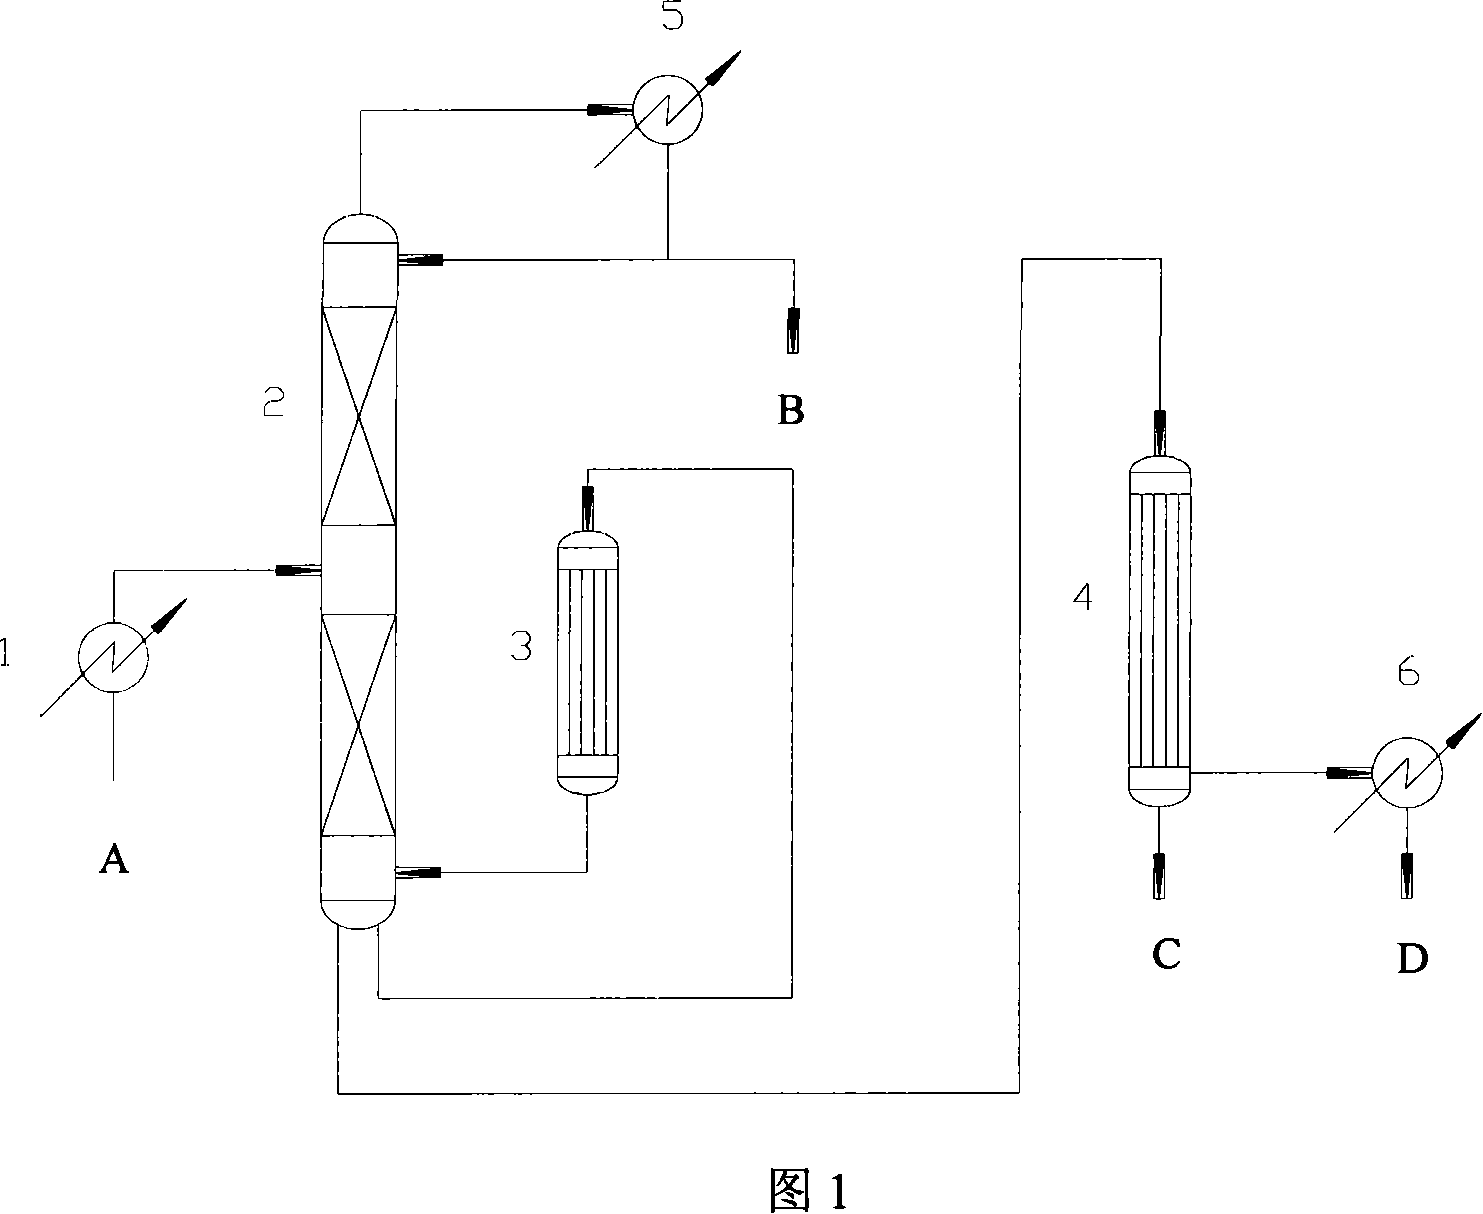 Method and apparatus for purifying vitamin A intermediate mynistic aldehyde